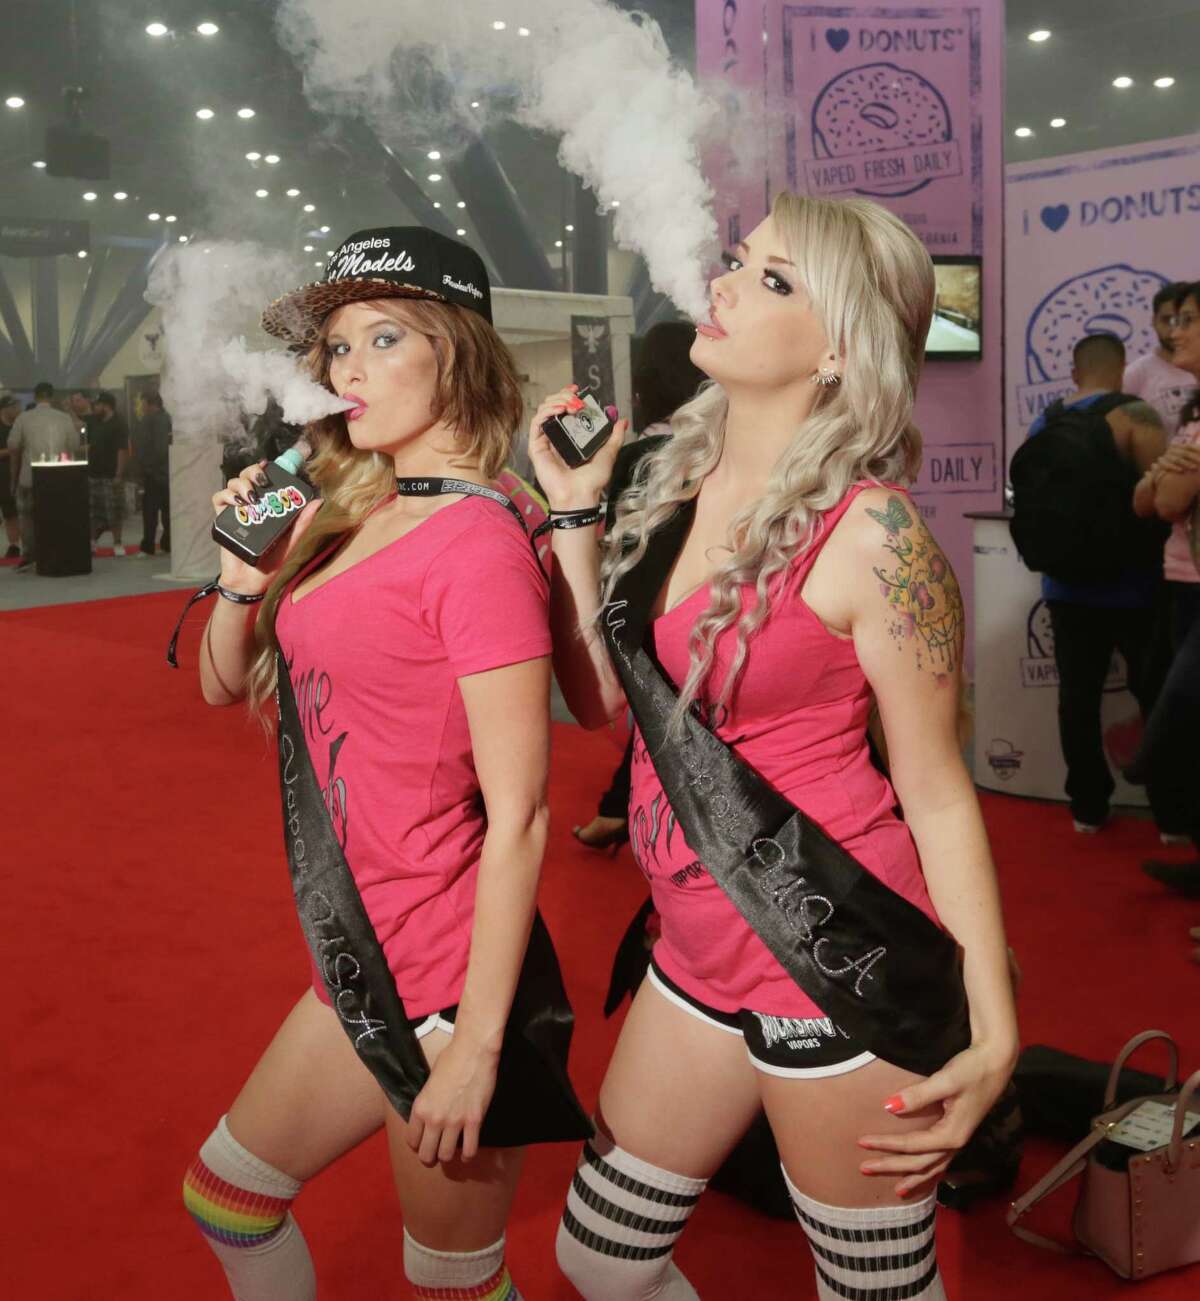 Fans pose for a photo at the Vape Summit IV, at the George R. Brown Convention Center, Saturday, Oct. 10, 2015, in Houston.